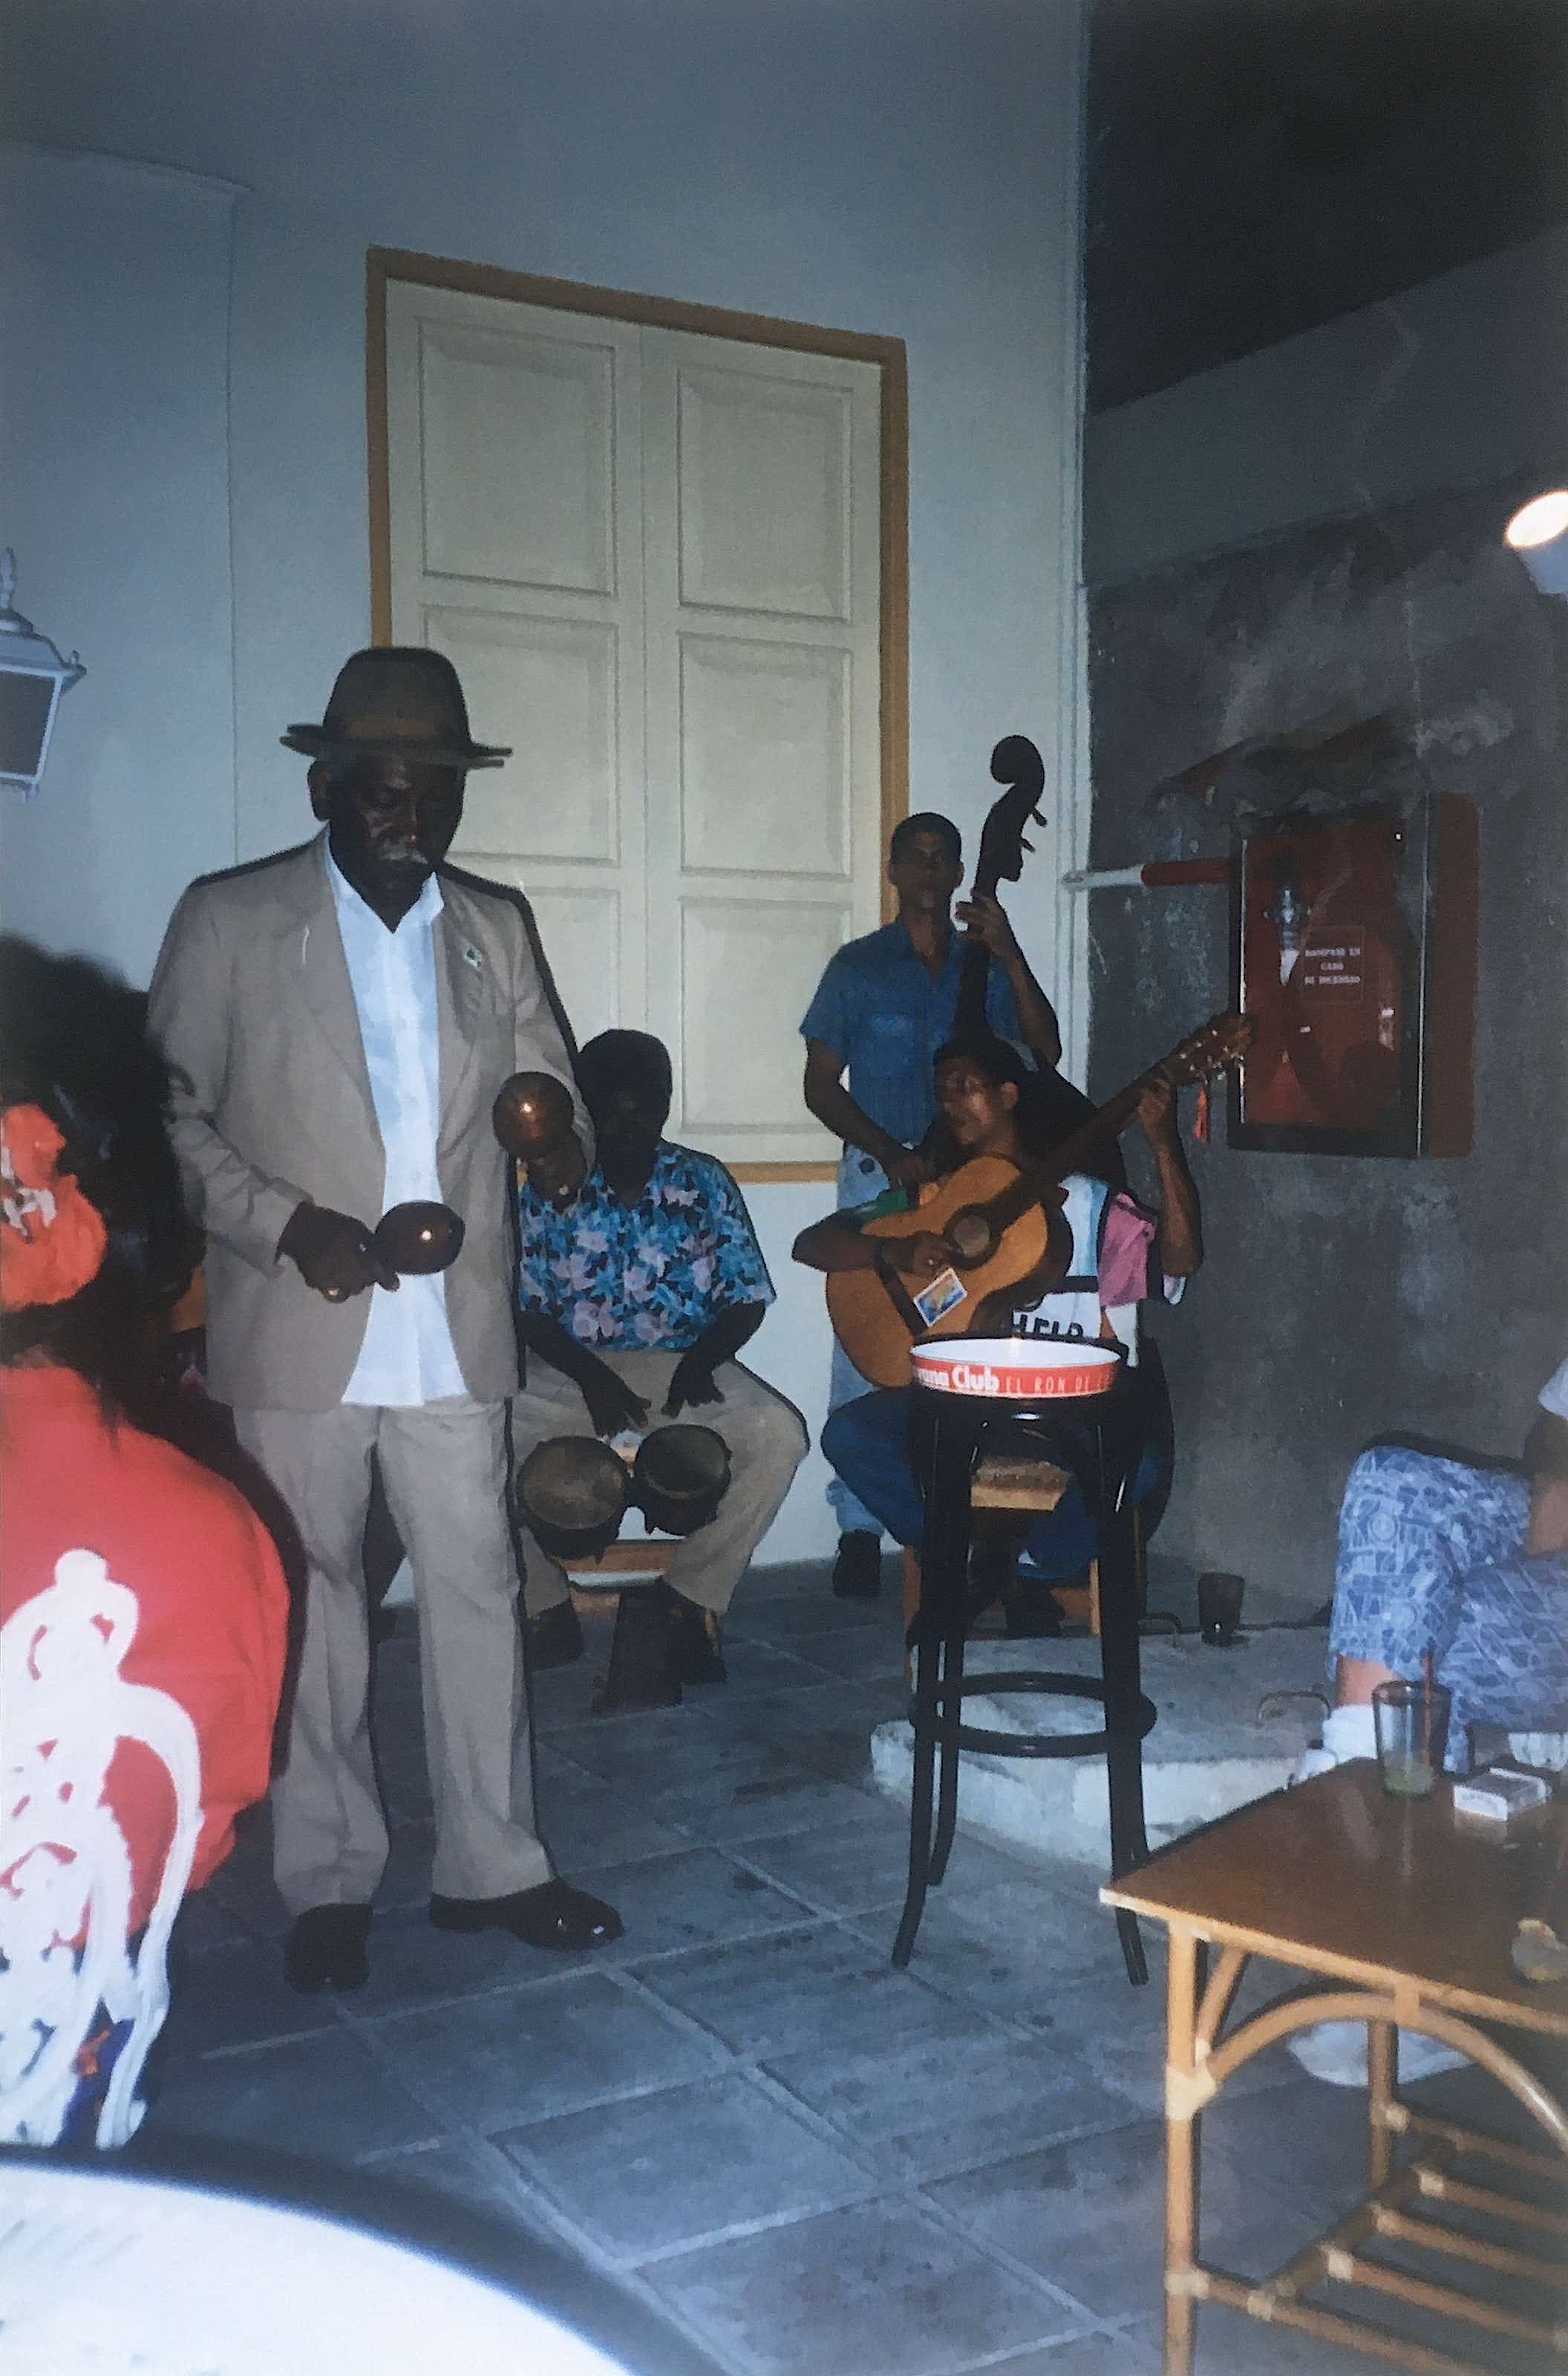 Santiago de Cuba, Cuba. Some of these musicians I met ended up Buena vista social club some years after.